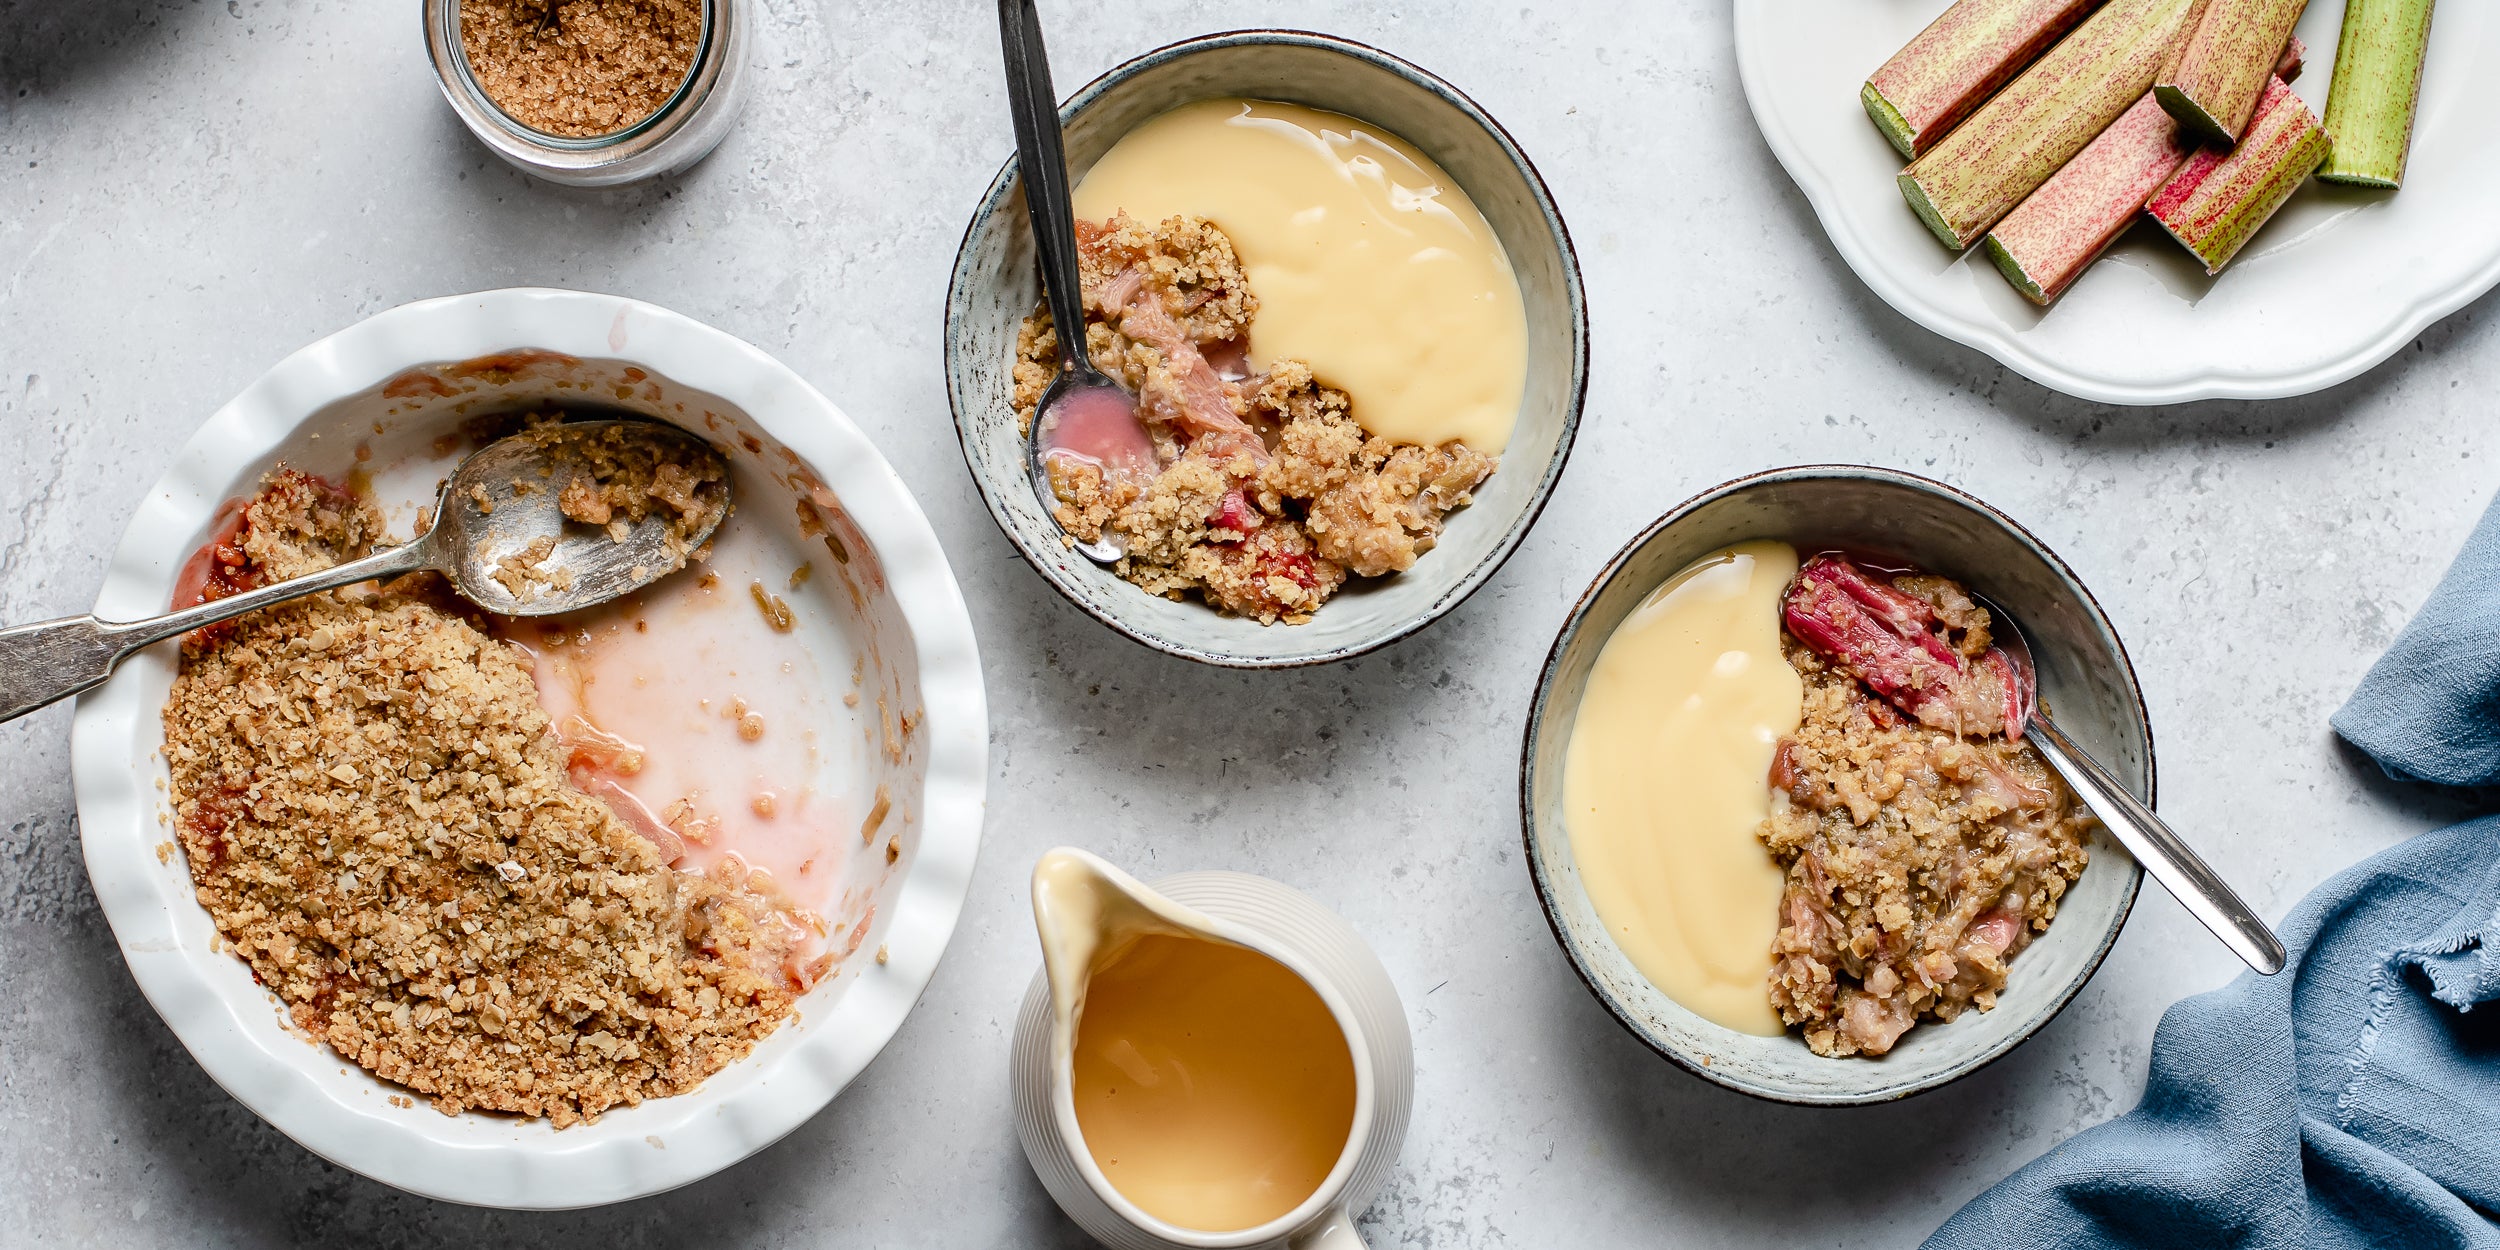 Top view of bowls of warm Rhubarb Crumble topped with vanilla custard ready to serve